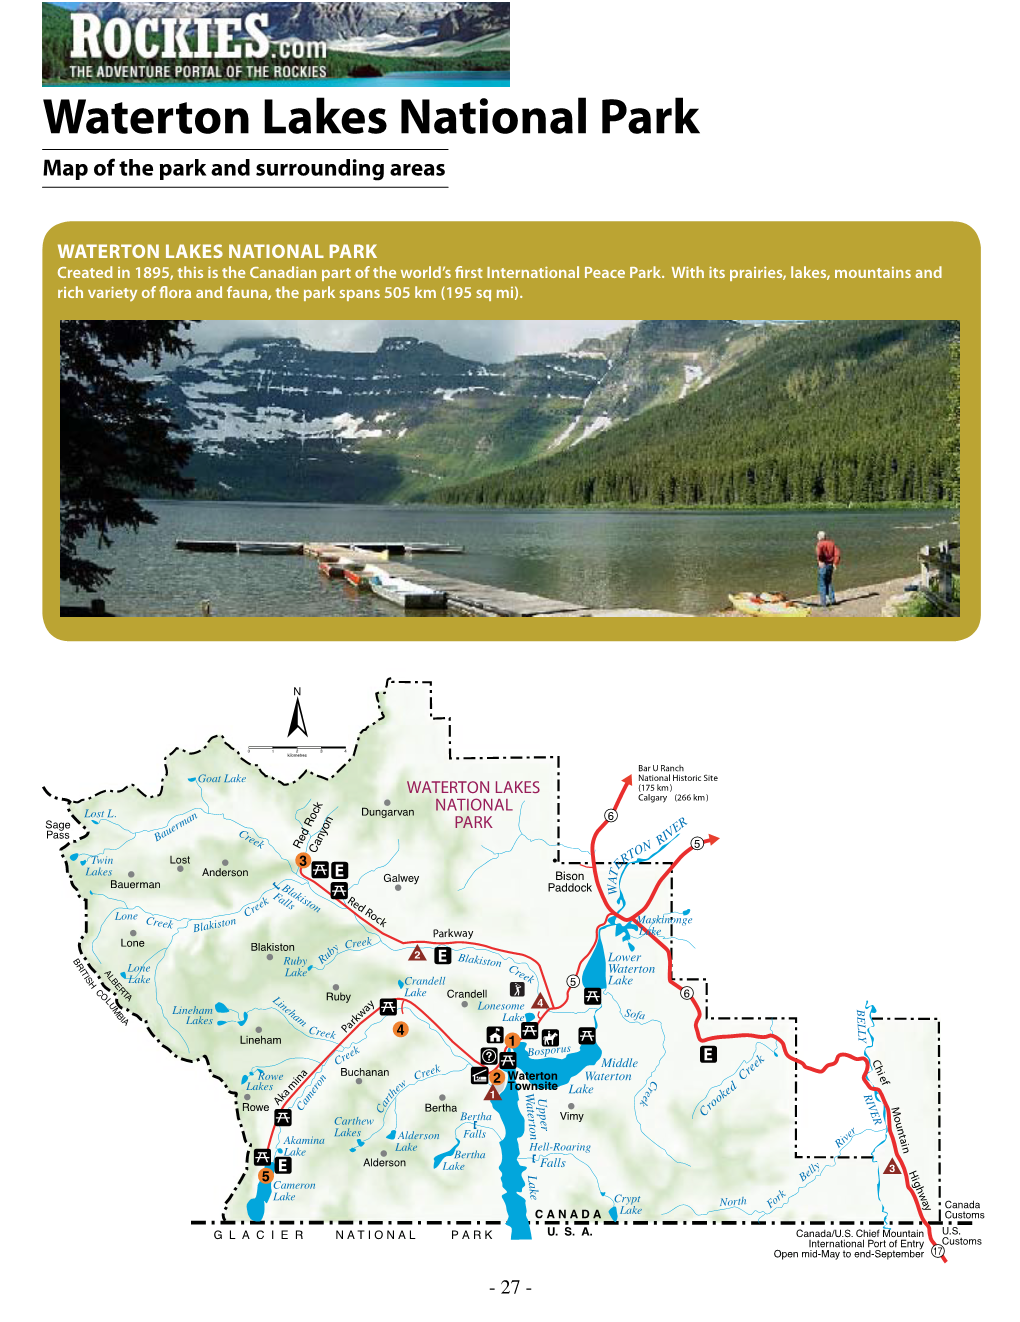 Waterton Lakes National Park Map of the Park and Surrounding Areas